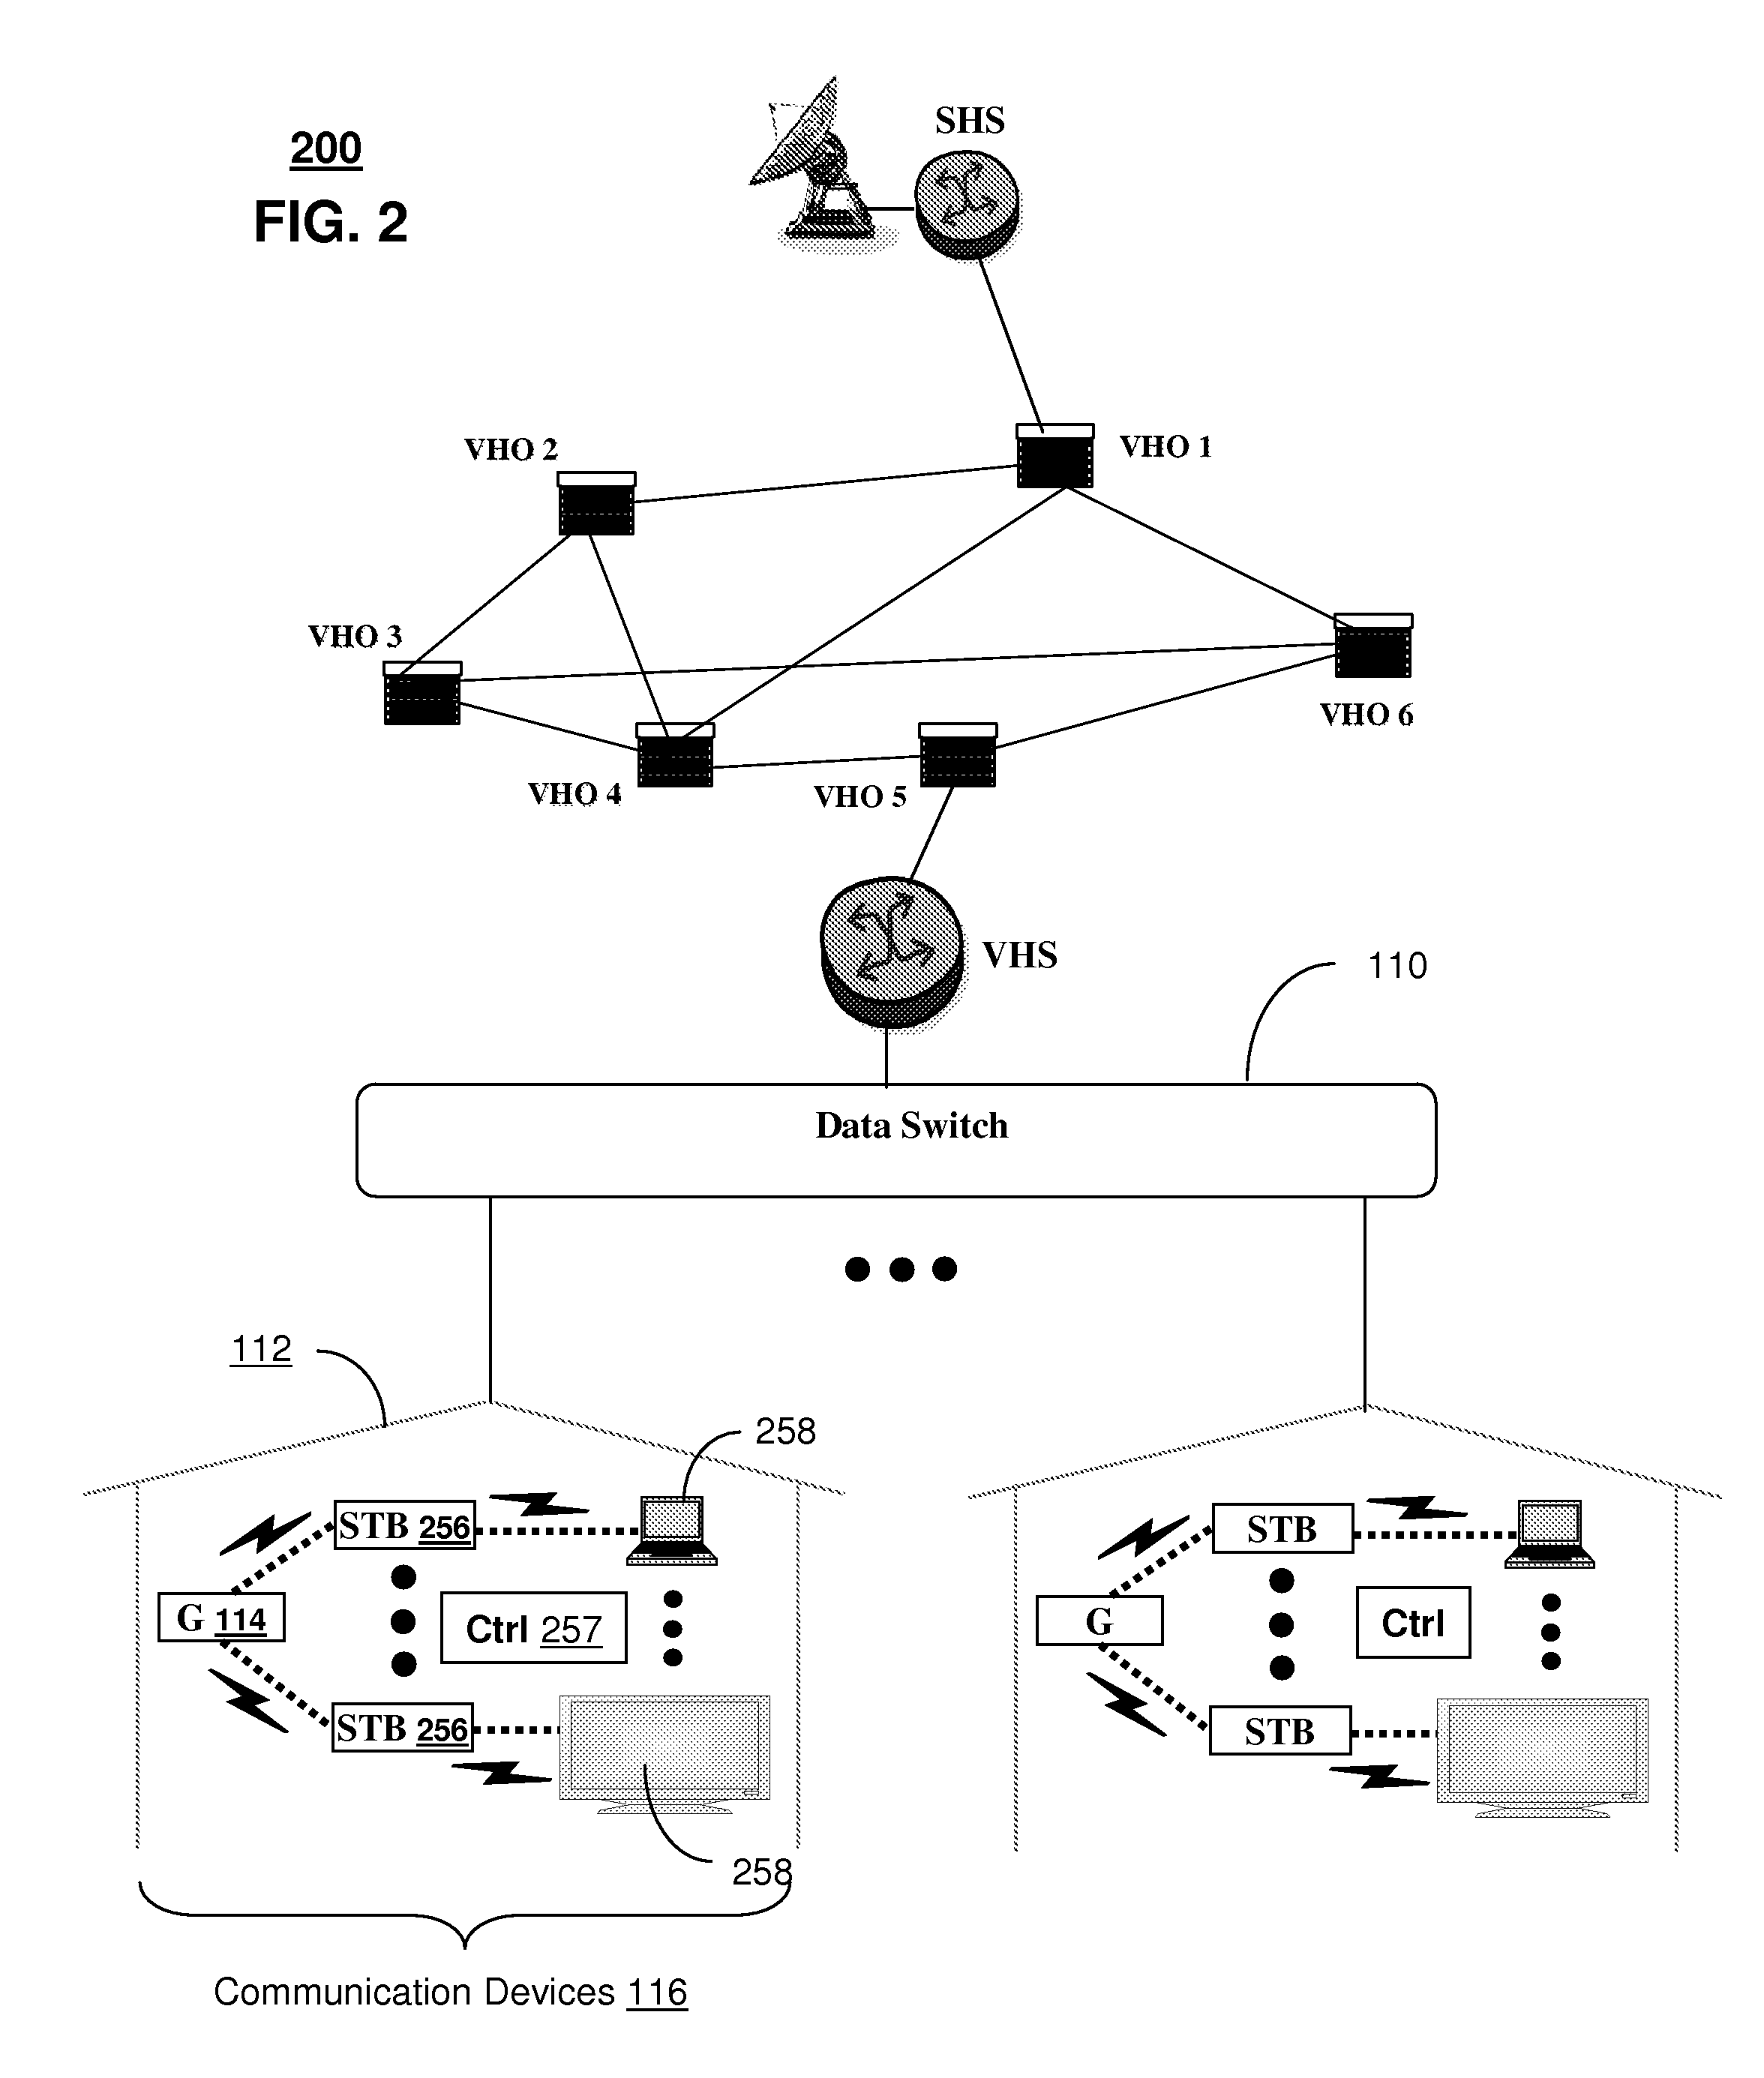 Apparatus for monitoring network connectivity